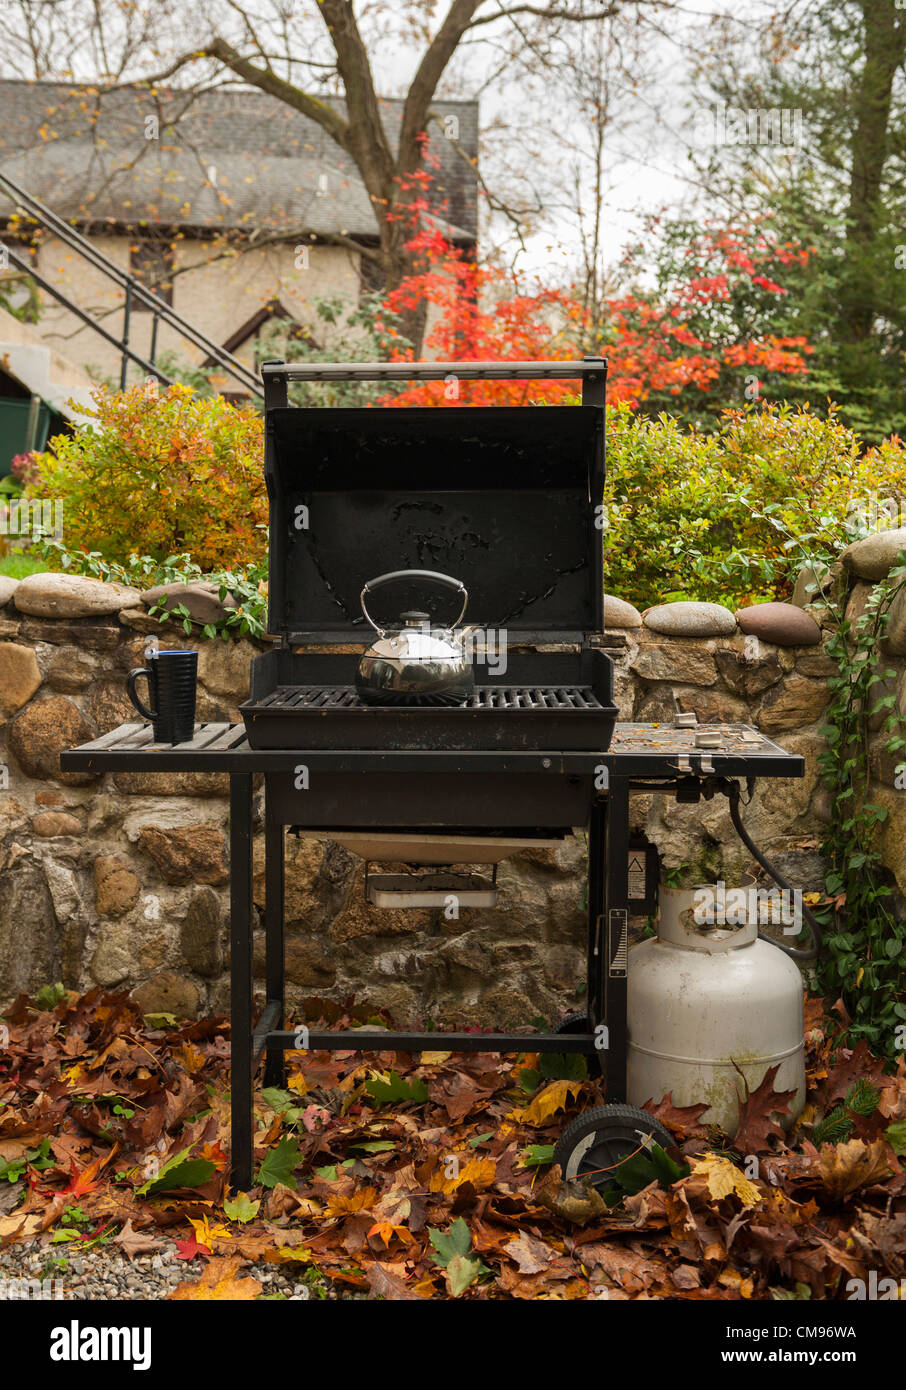 1 November 2012 Superstorm Hurricane Sandy Day 4 : With much of the US East Coast including the New York suburbs still without power, one Westchester County resident finds a way to make hot tea. This Weber gas grill survived being in 4 feet of water and still works. © 2012 Marianne A. Campolongo/Alamy News Stock Photo